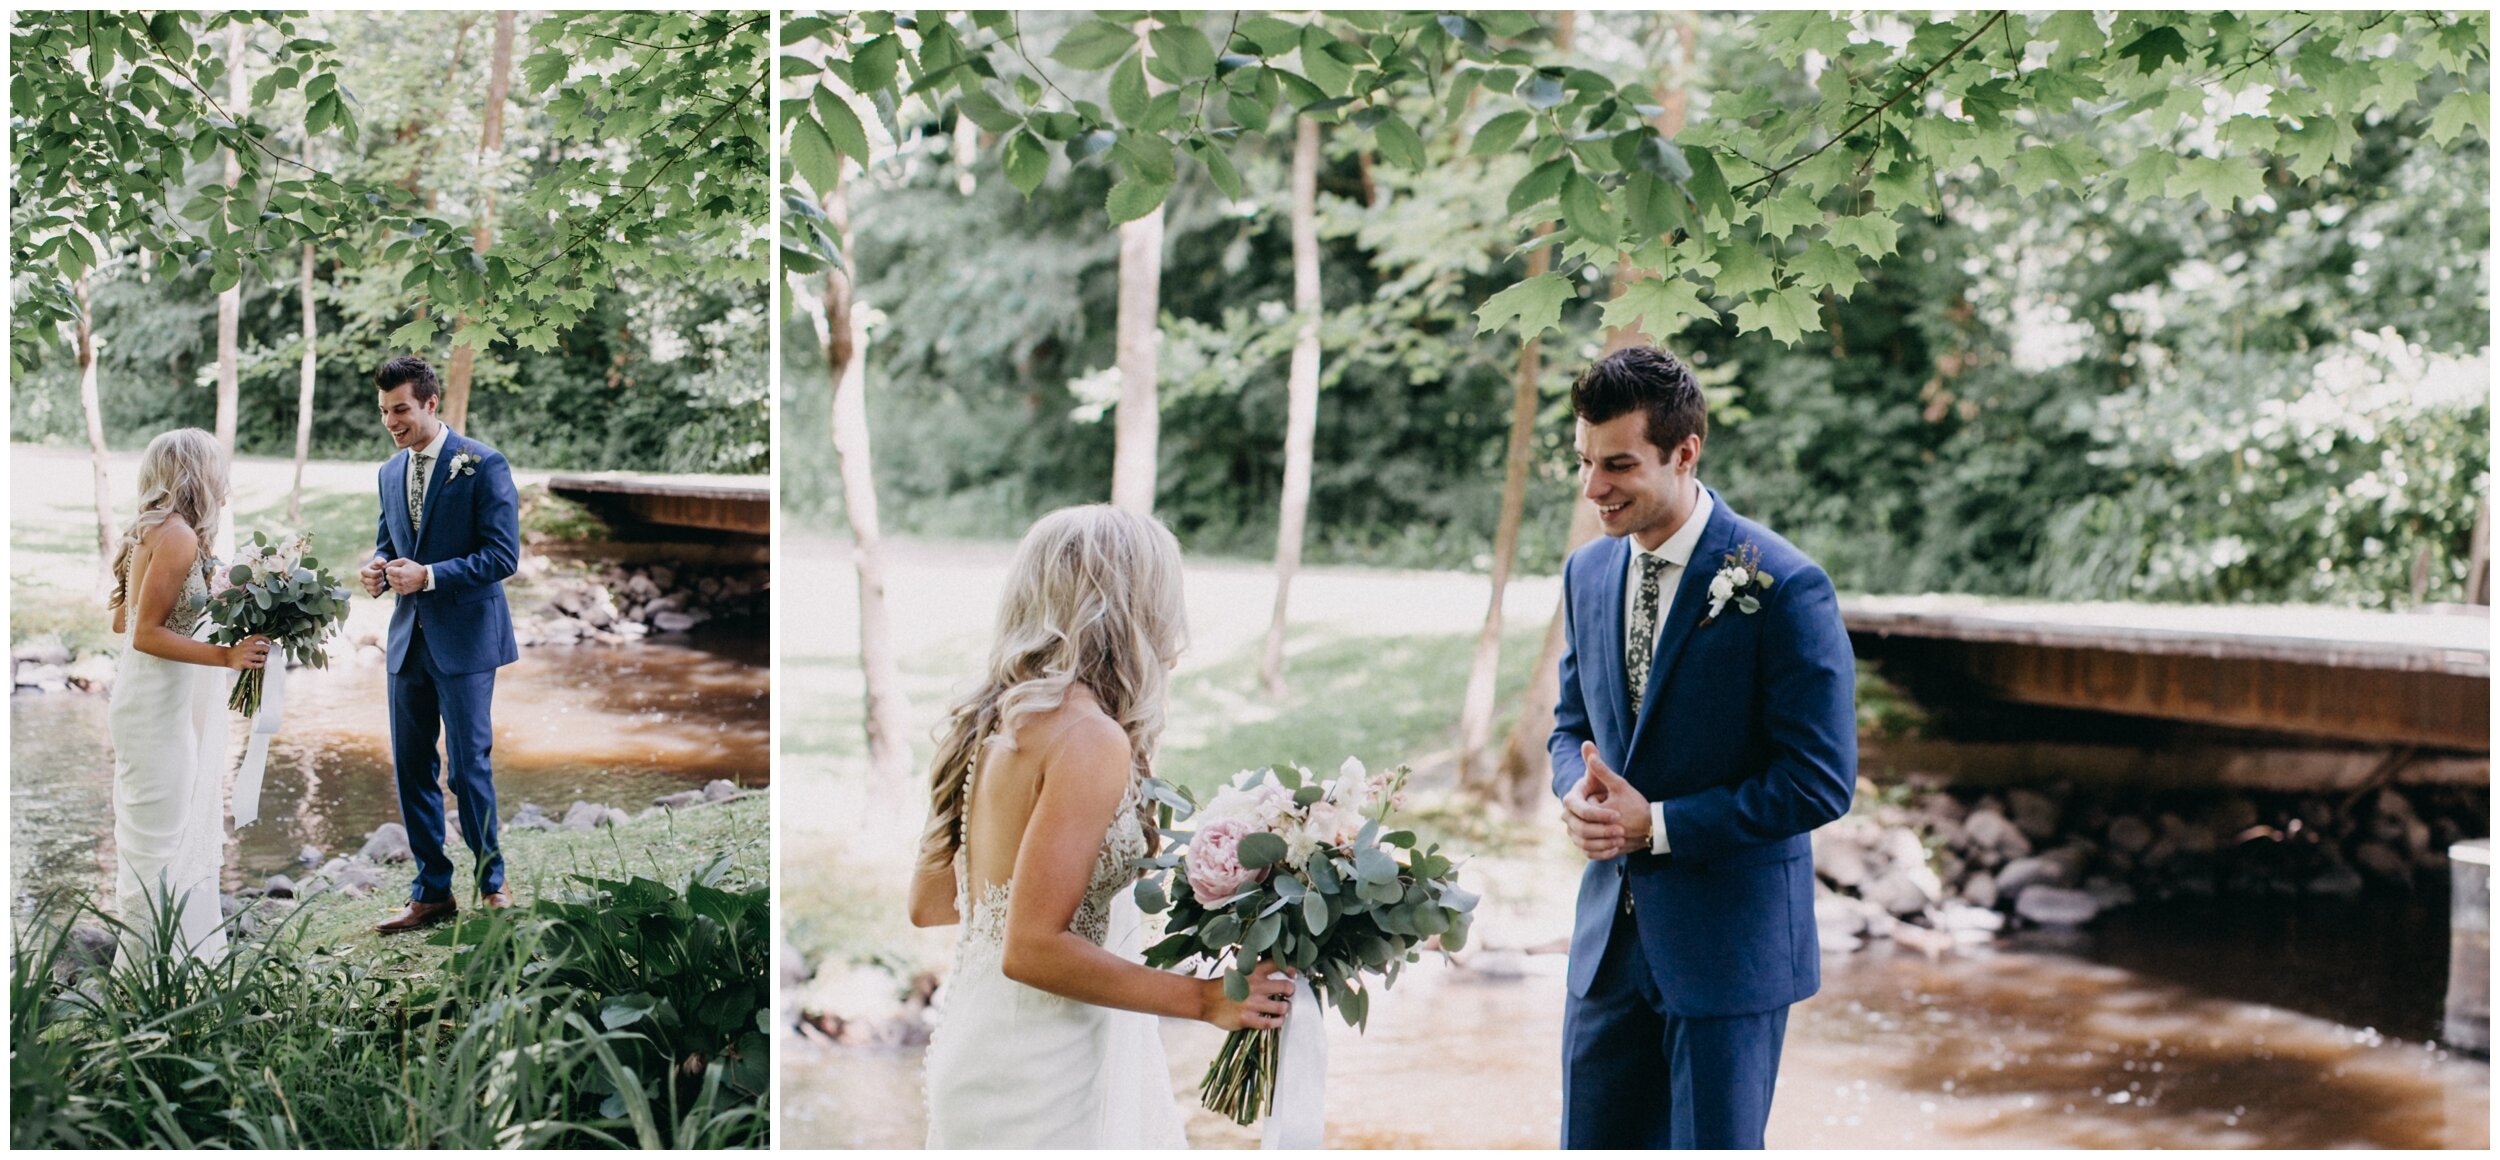 Bride and groom first look by creek in the woods at Minnesota farm wedding venue